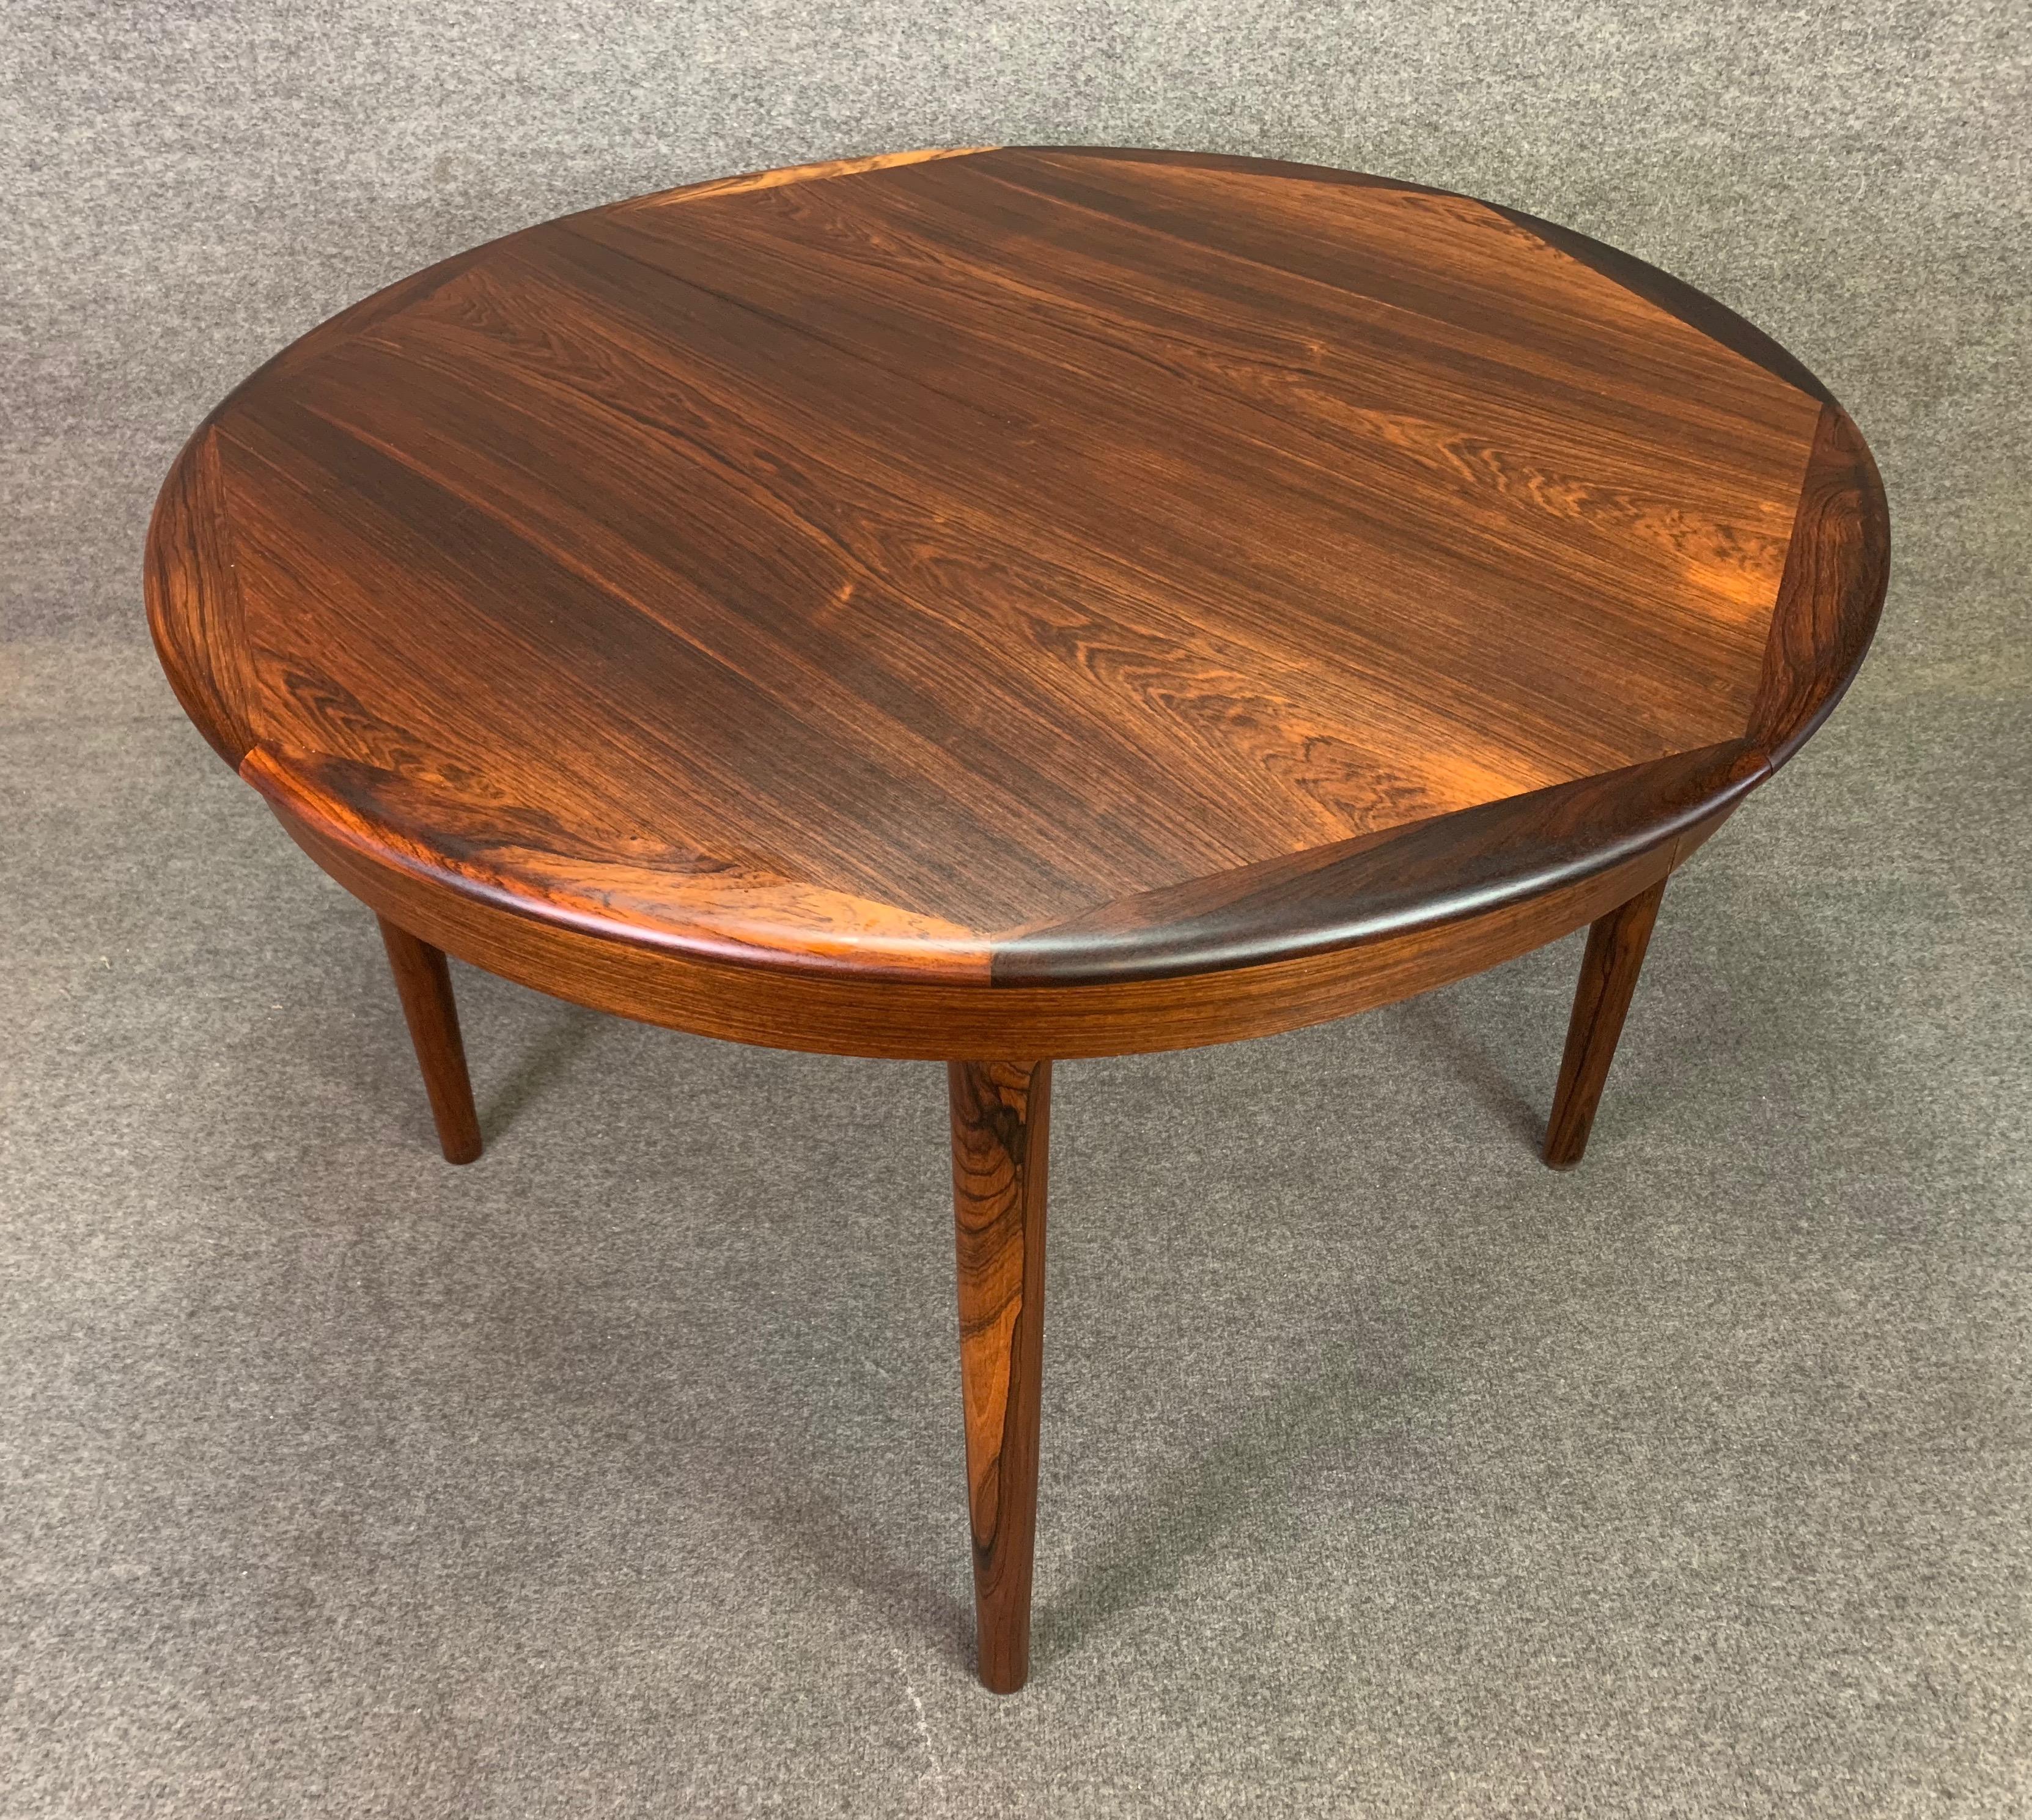 Scandinavian Modern Vintage Danish Mid-Century Modern Rosewood Round Dining Table with Leaves